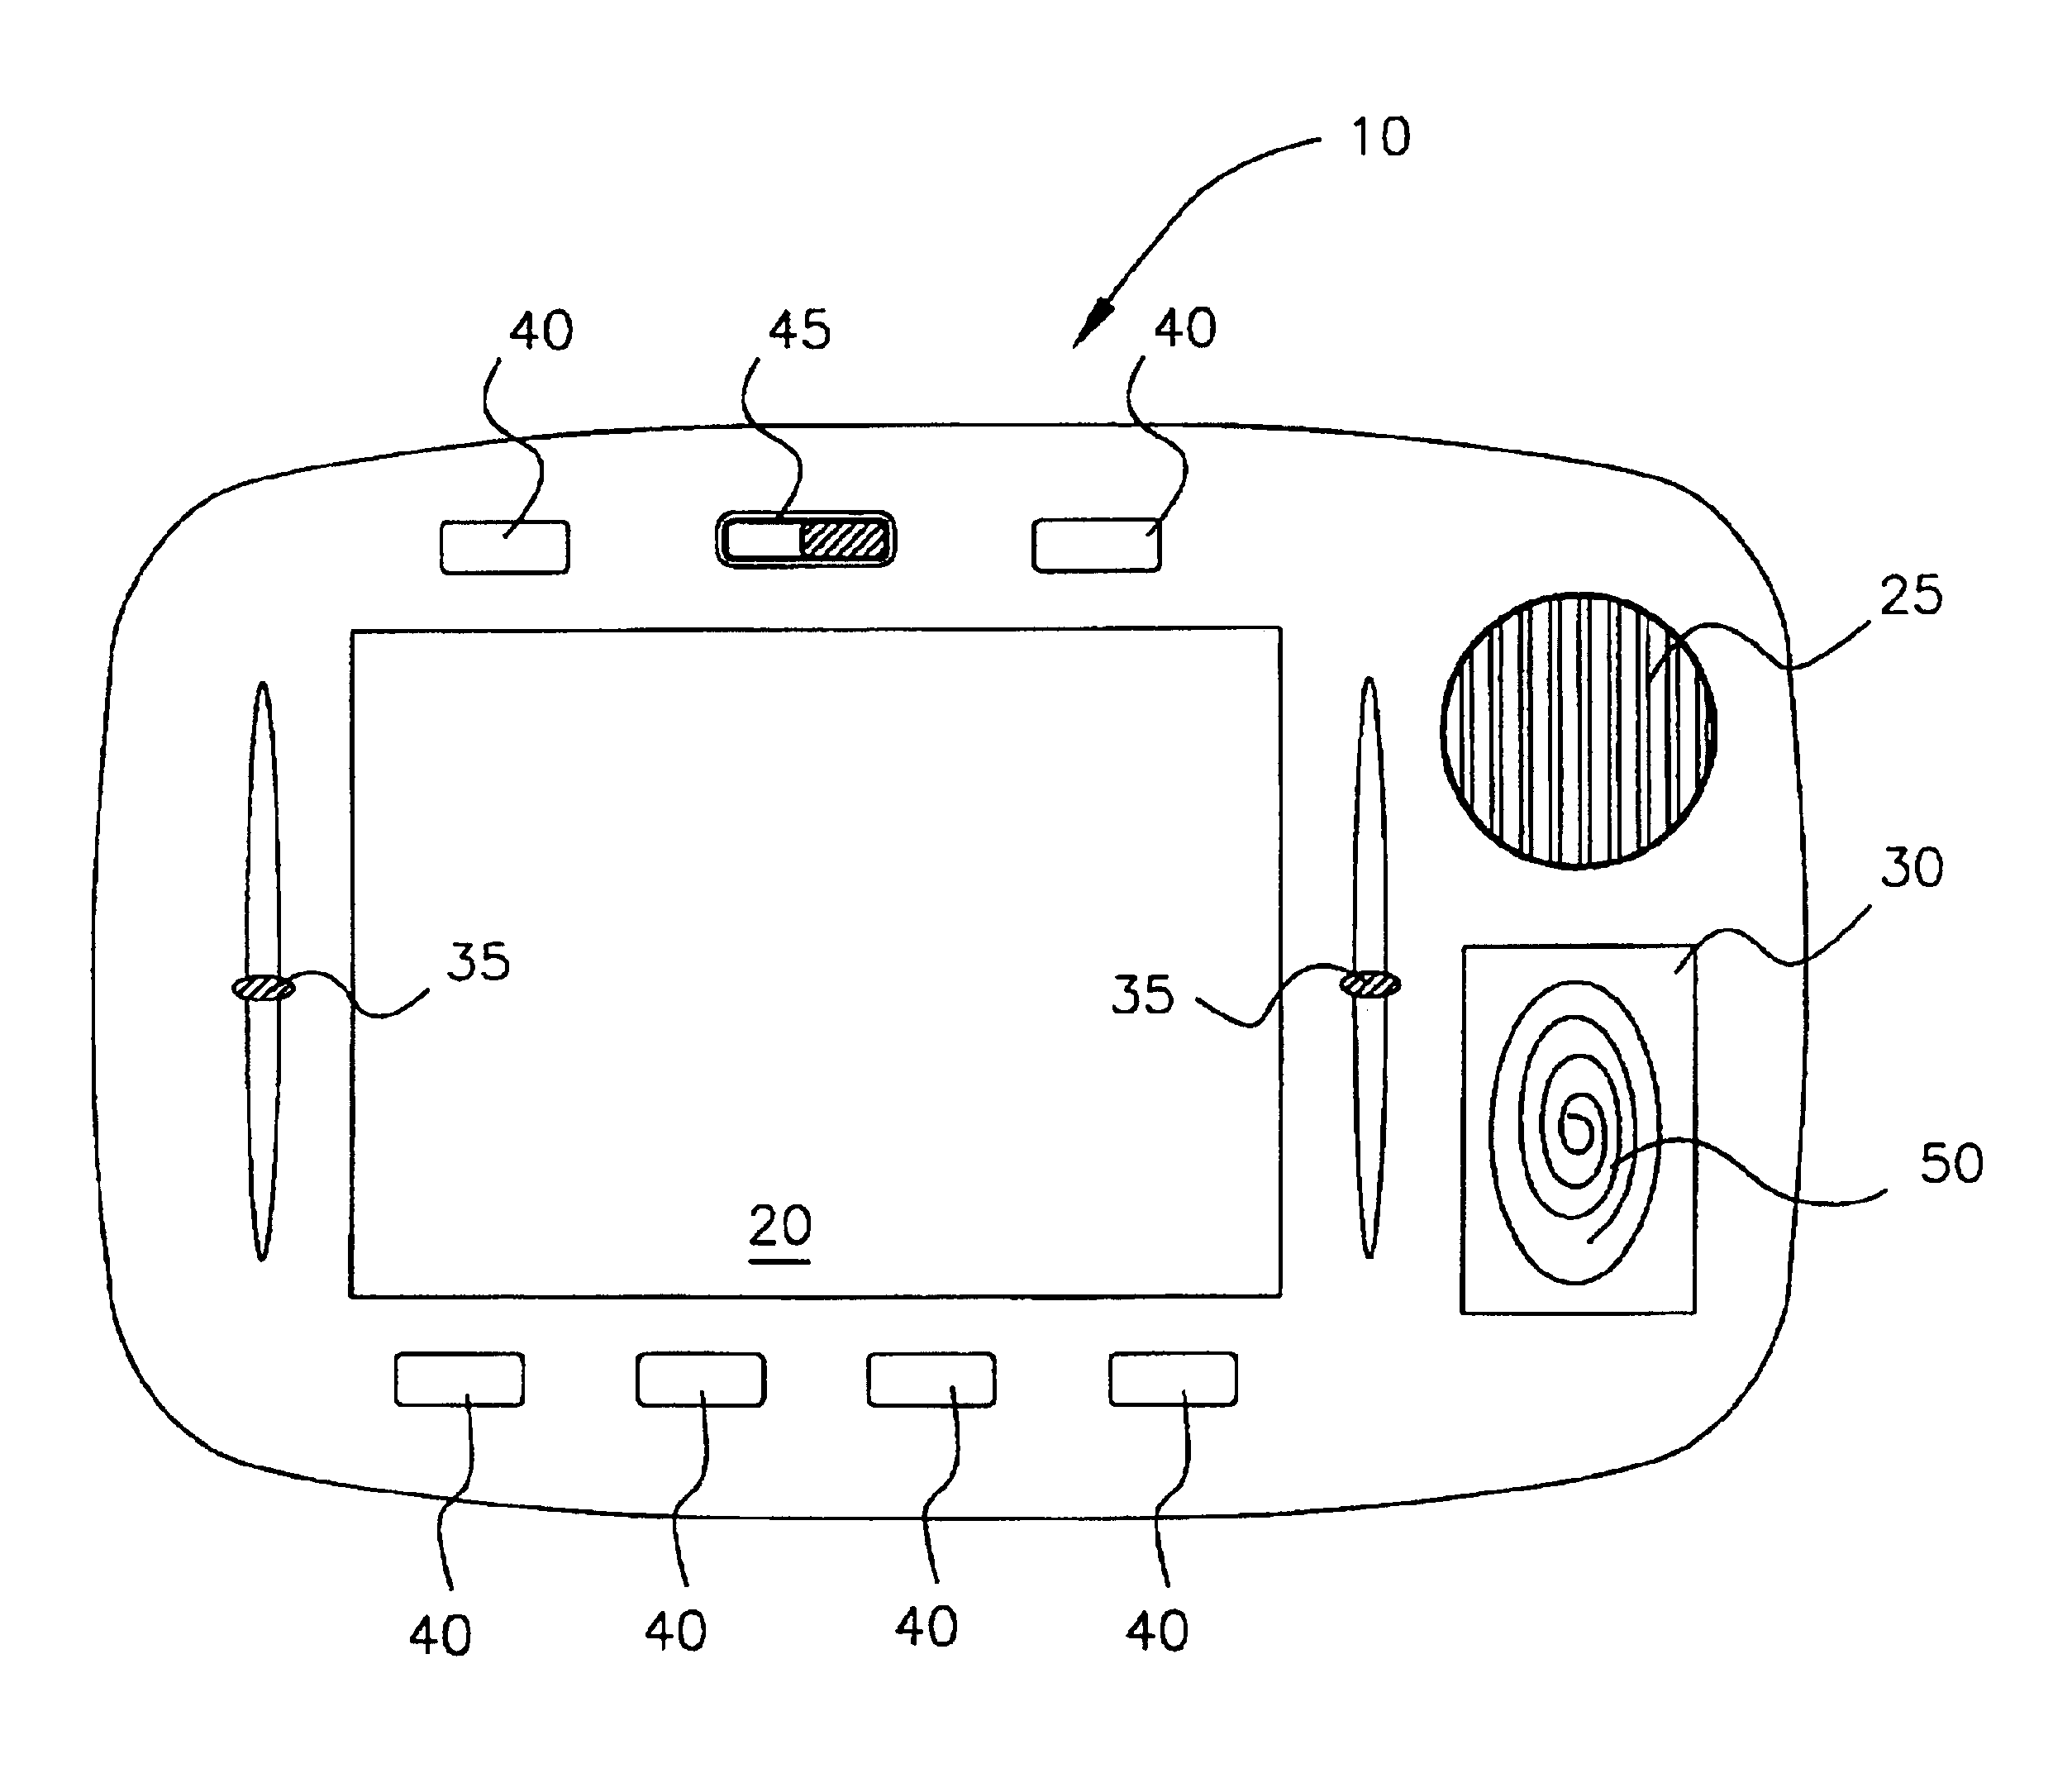 Method of controlling multi-user access to the functionality of consumer devices